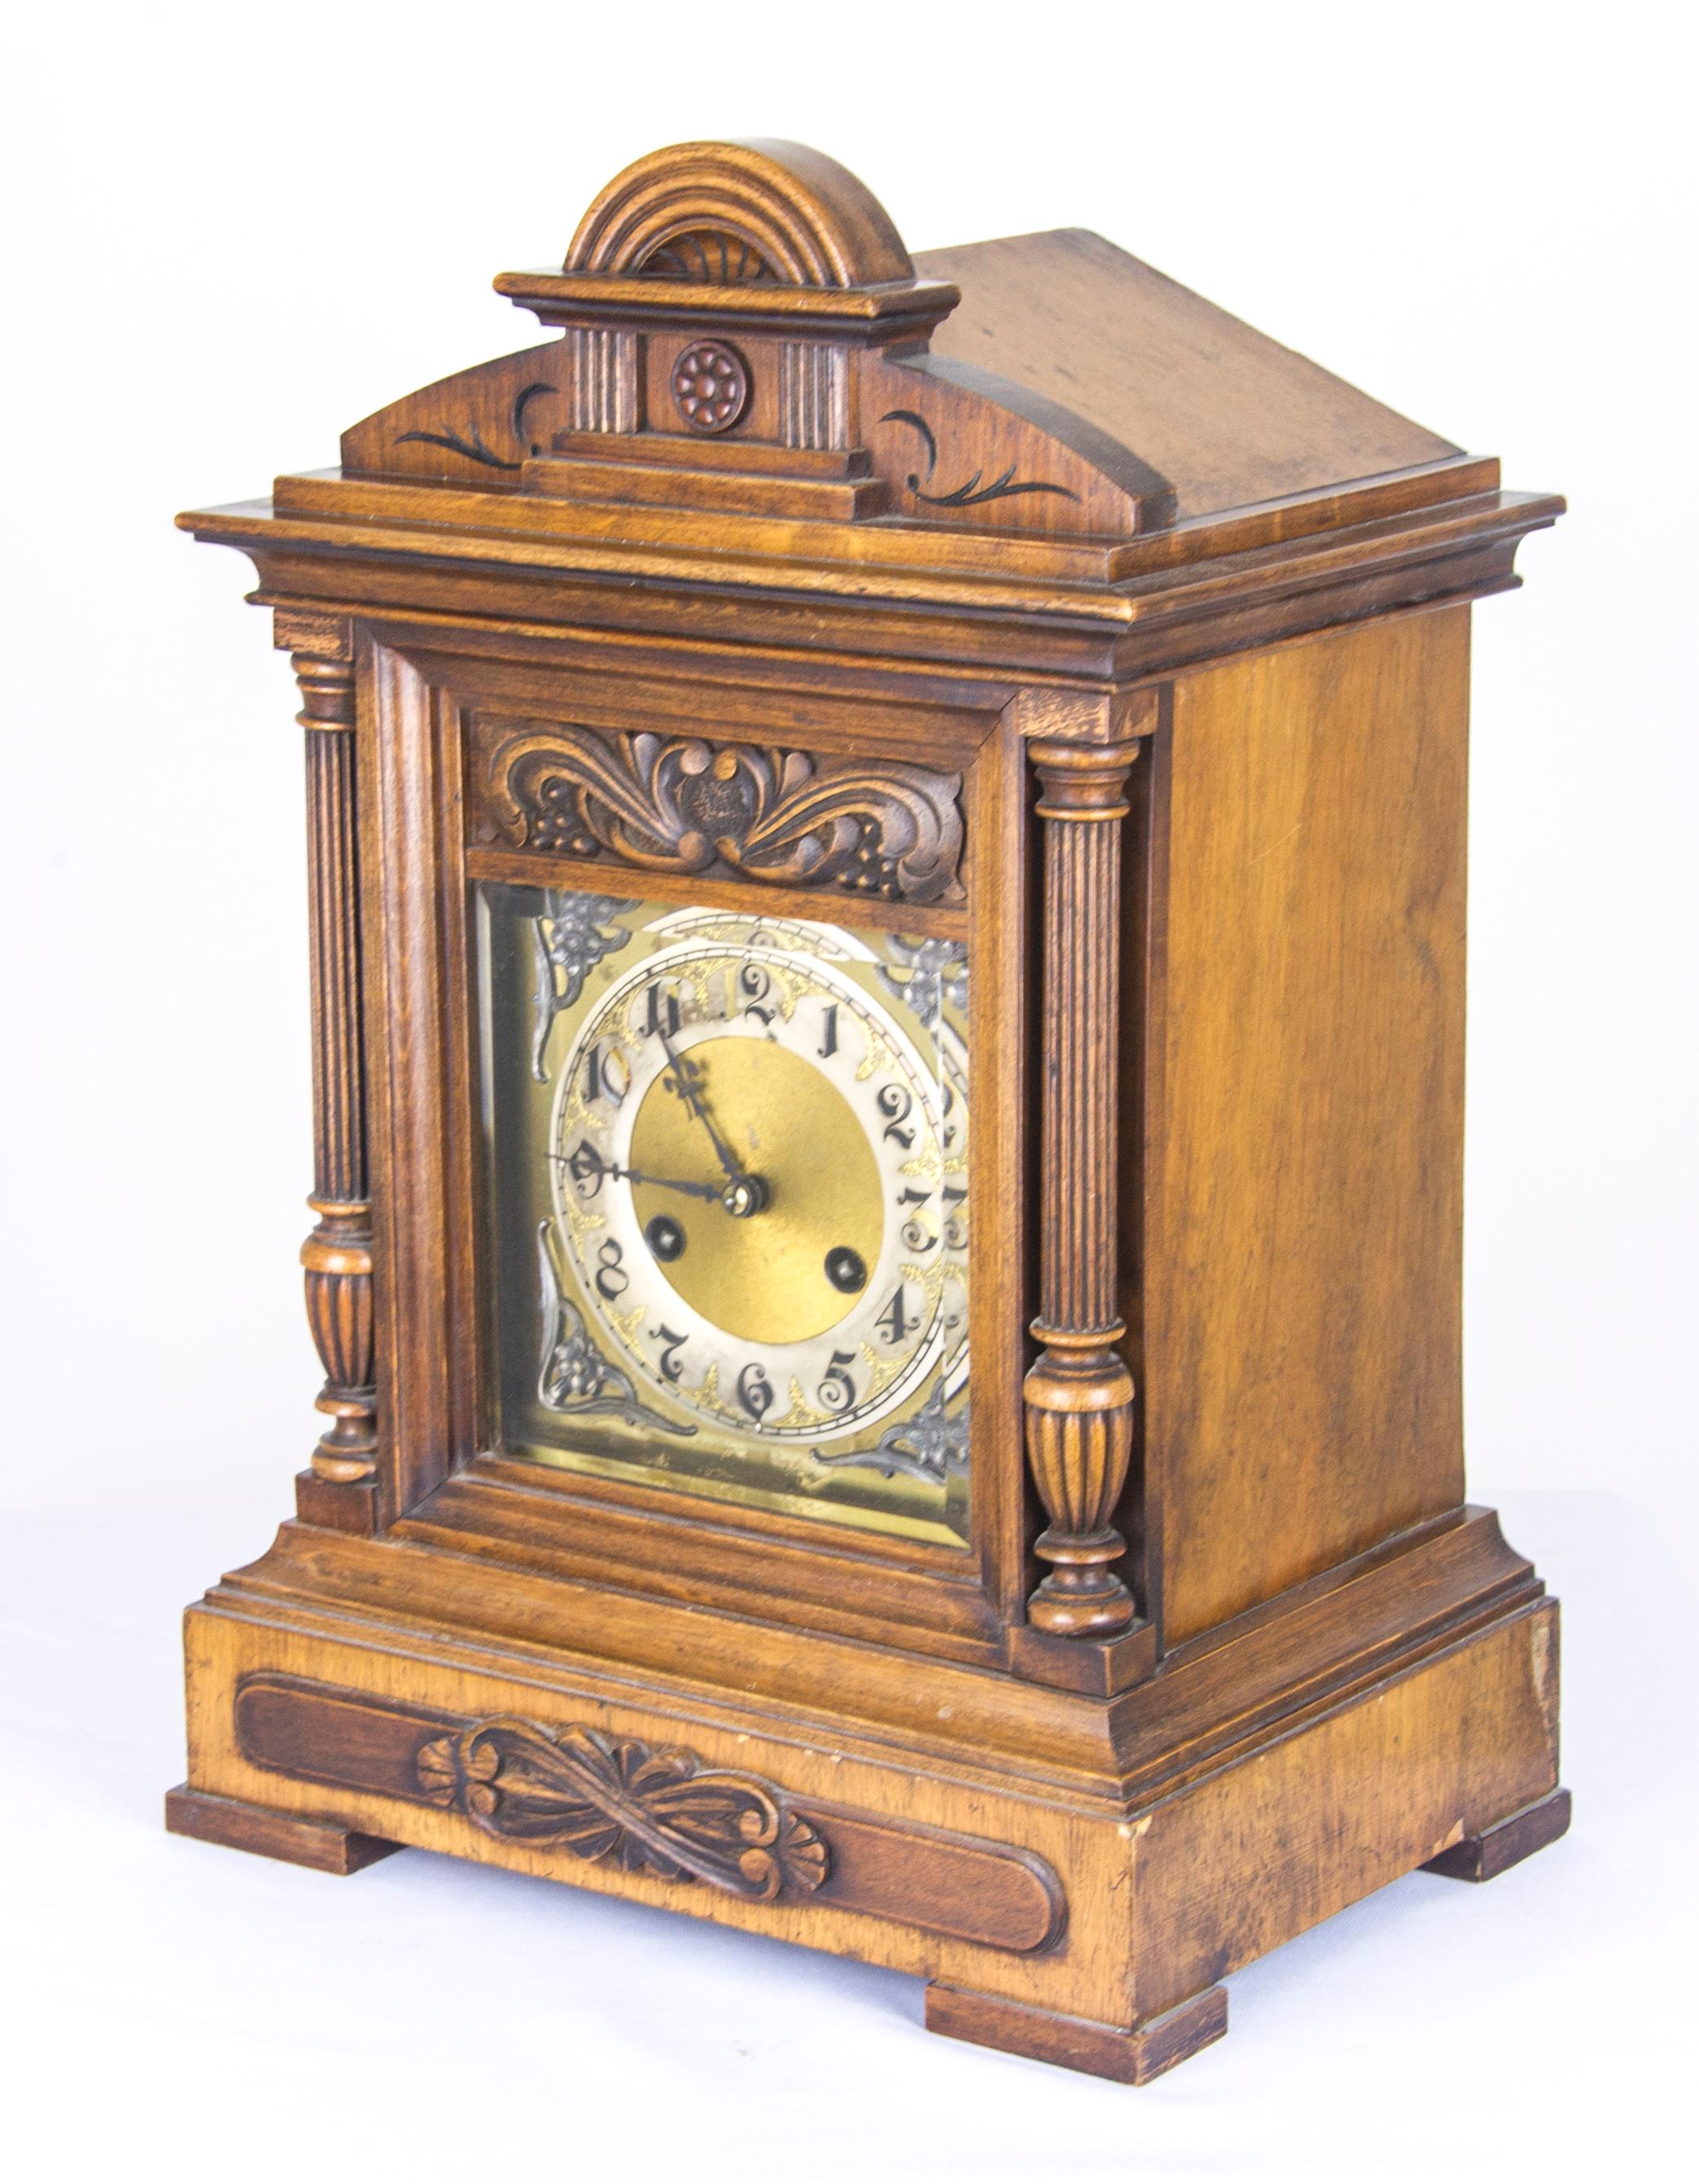 Antique mantel clock, bracket clock, walnut cased, German 1900, antique furniture, H491

8 day movement striking on the hour and each quarter hour
Face has an etched silver chapter ring with gilded spandrels
Black Arabic numerals
Ormolu